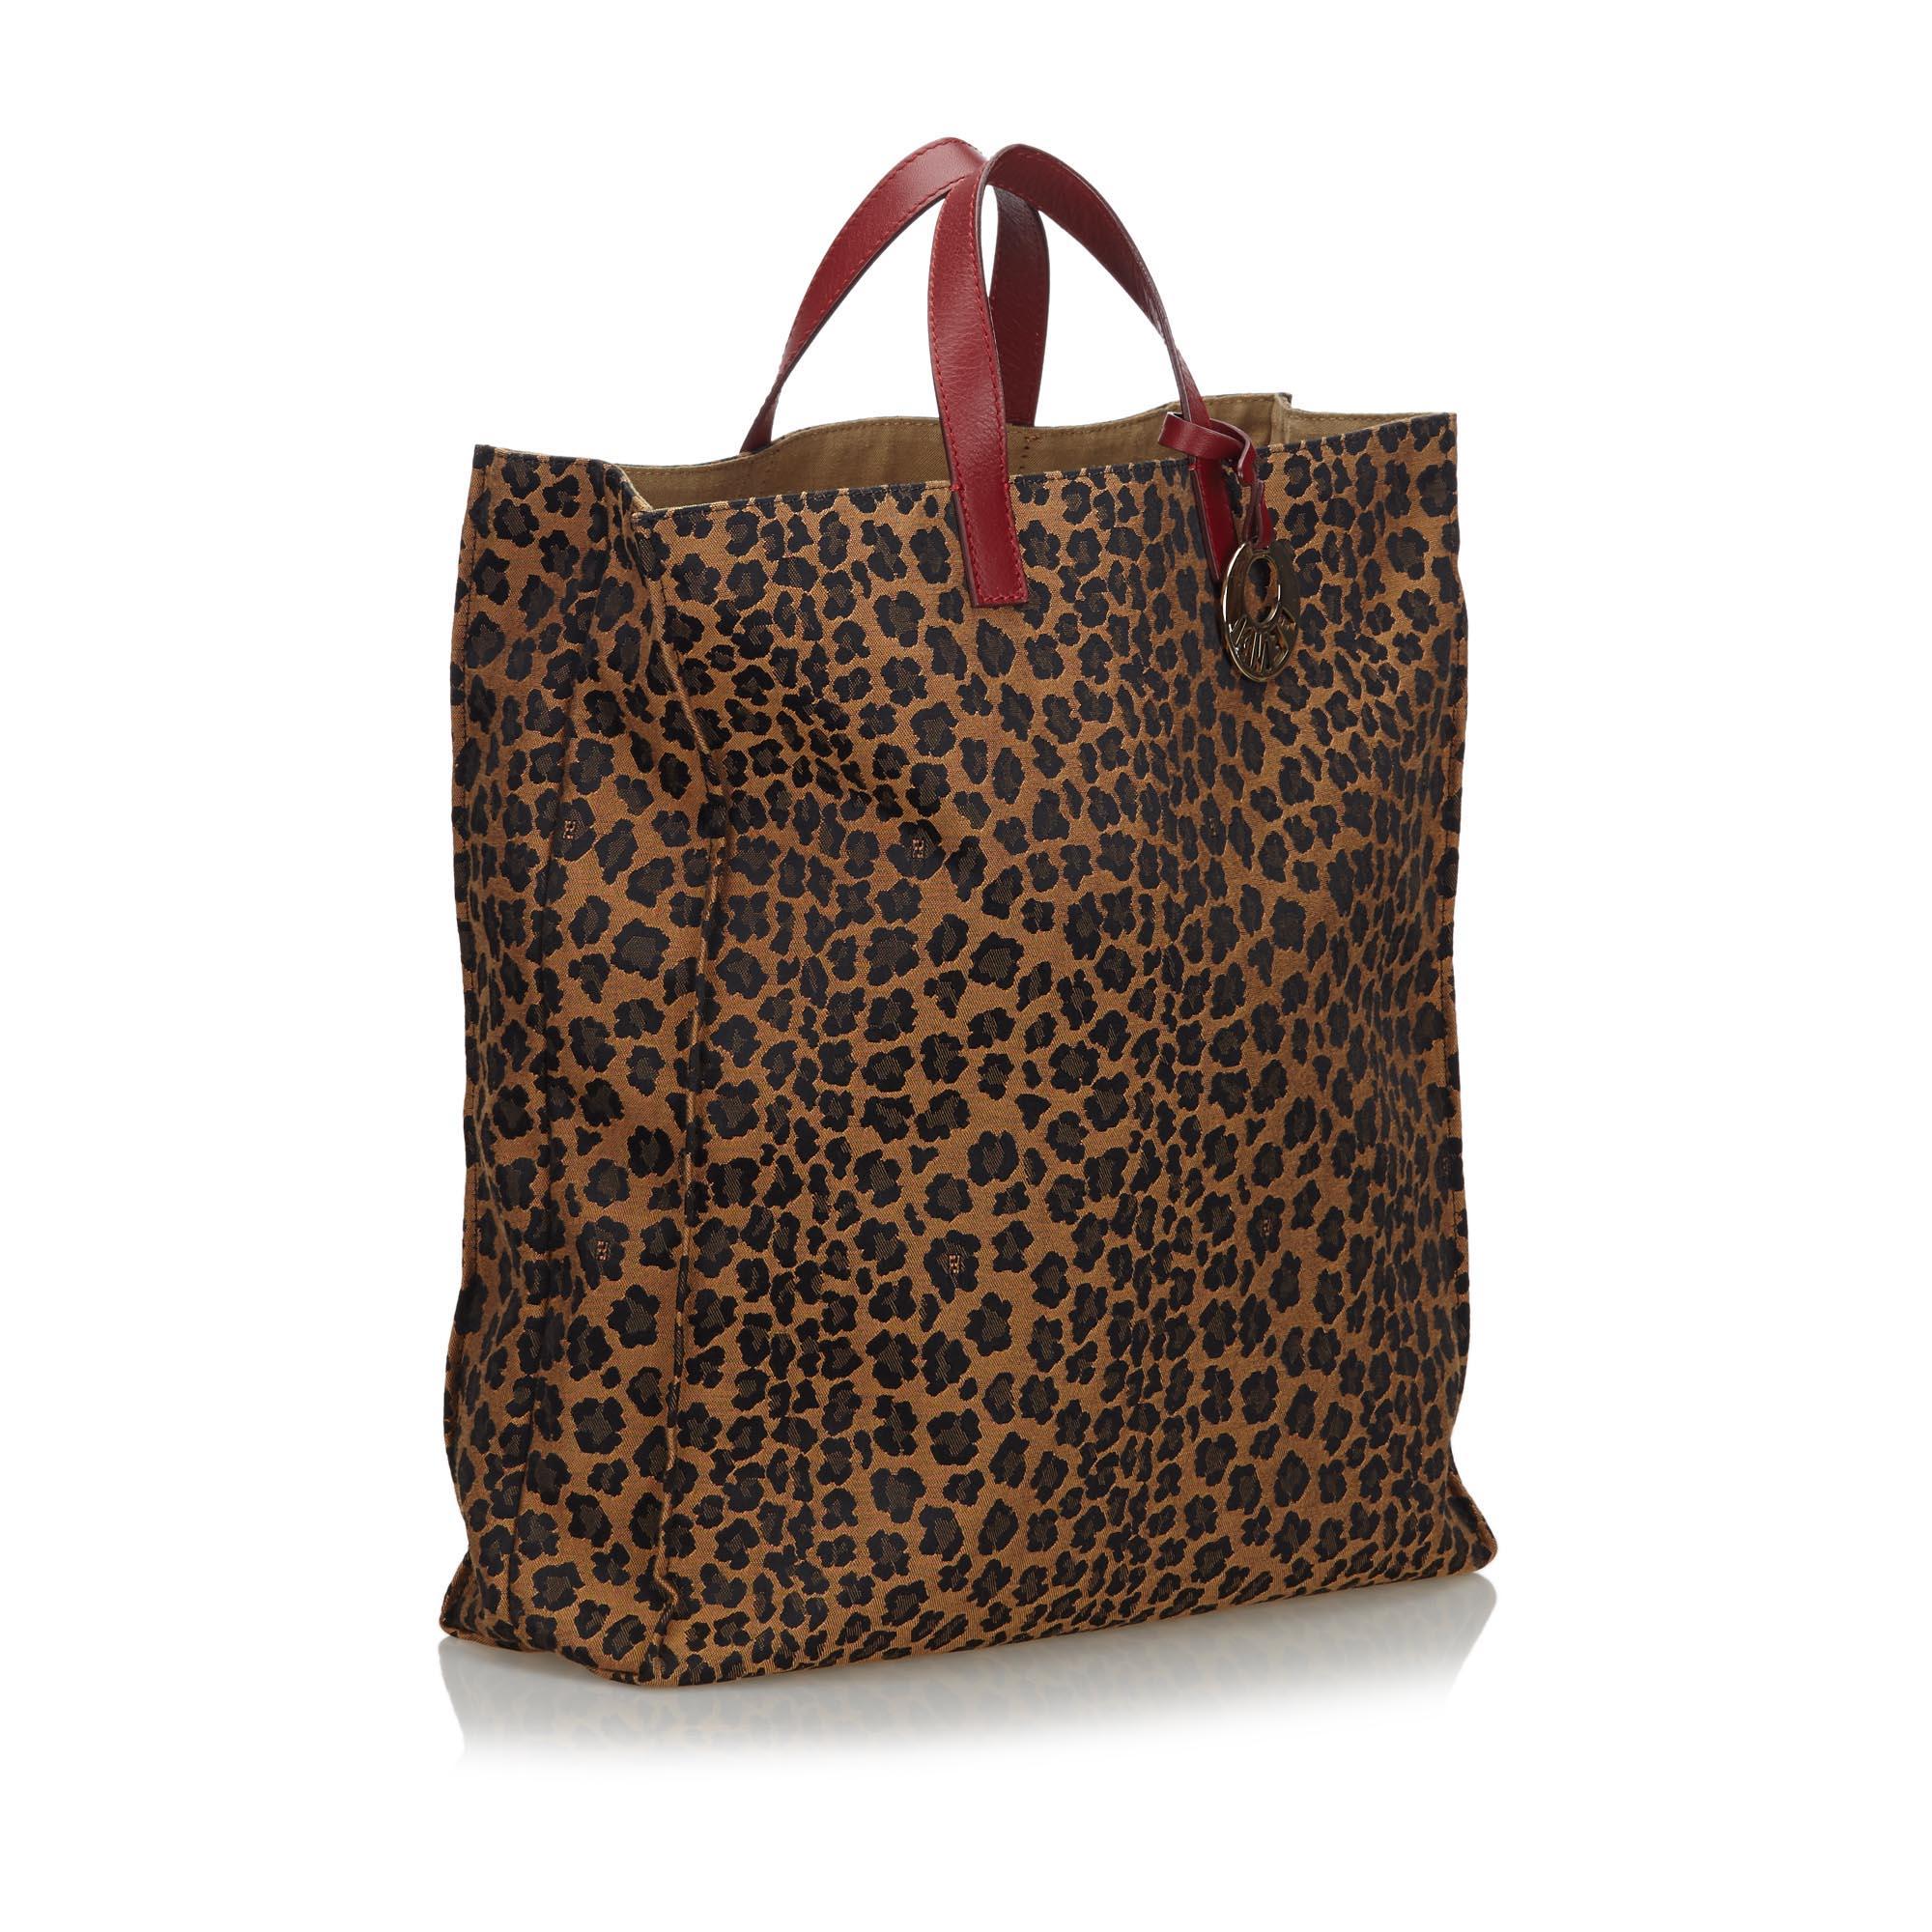 Fendi Leopard Print Canvas Tote Bag

This tote bag features a printed canvas body, flat leather handles, and an open top. 

Approx. 

Length: 37 cm. Width: 33 cm. Depth: 9 cm. 
Drop: 9 cm.